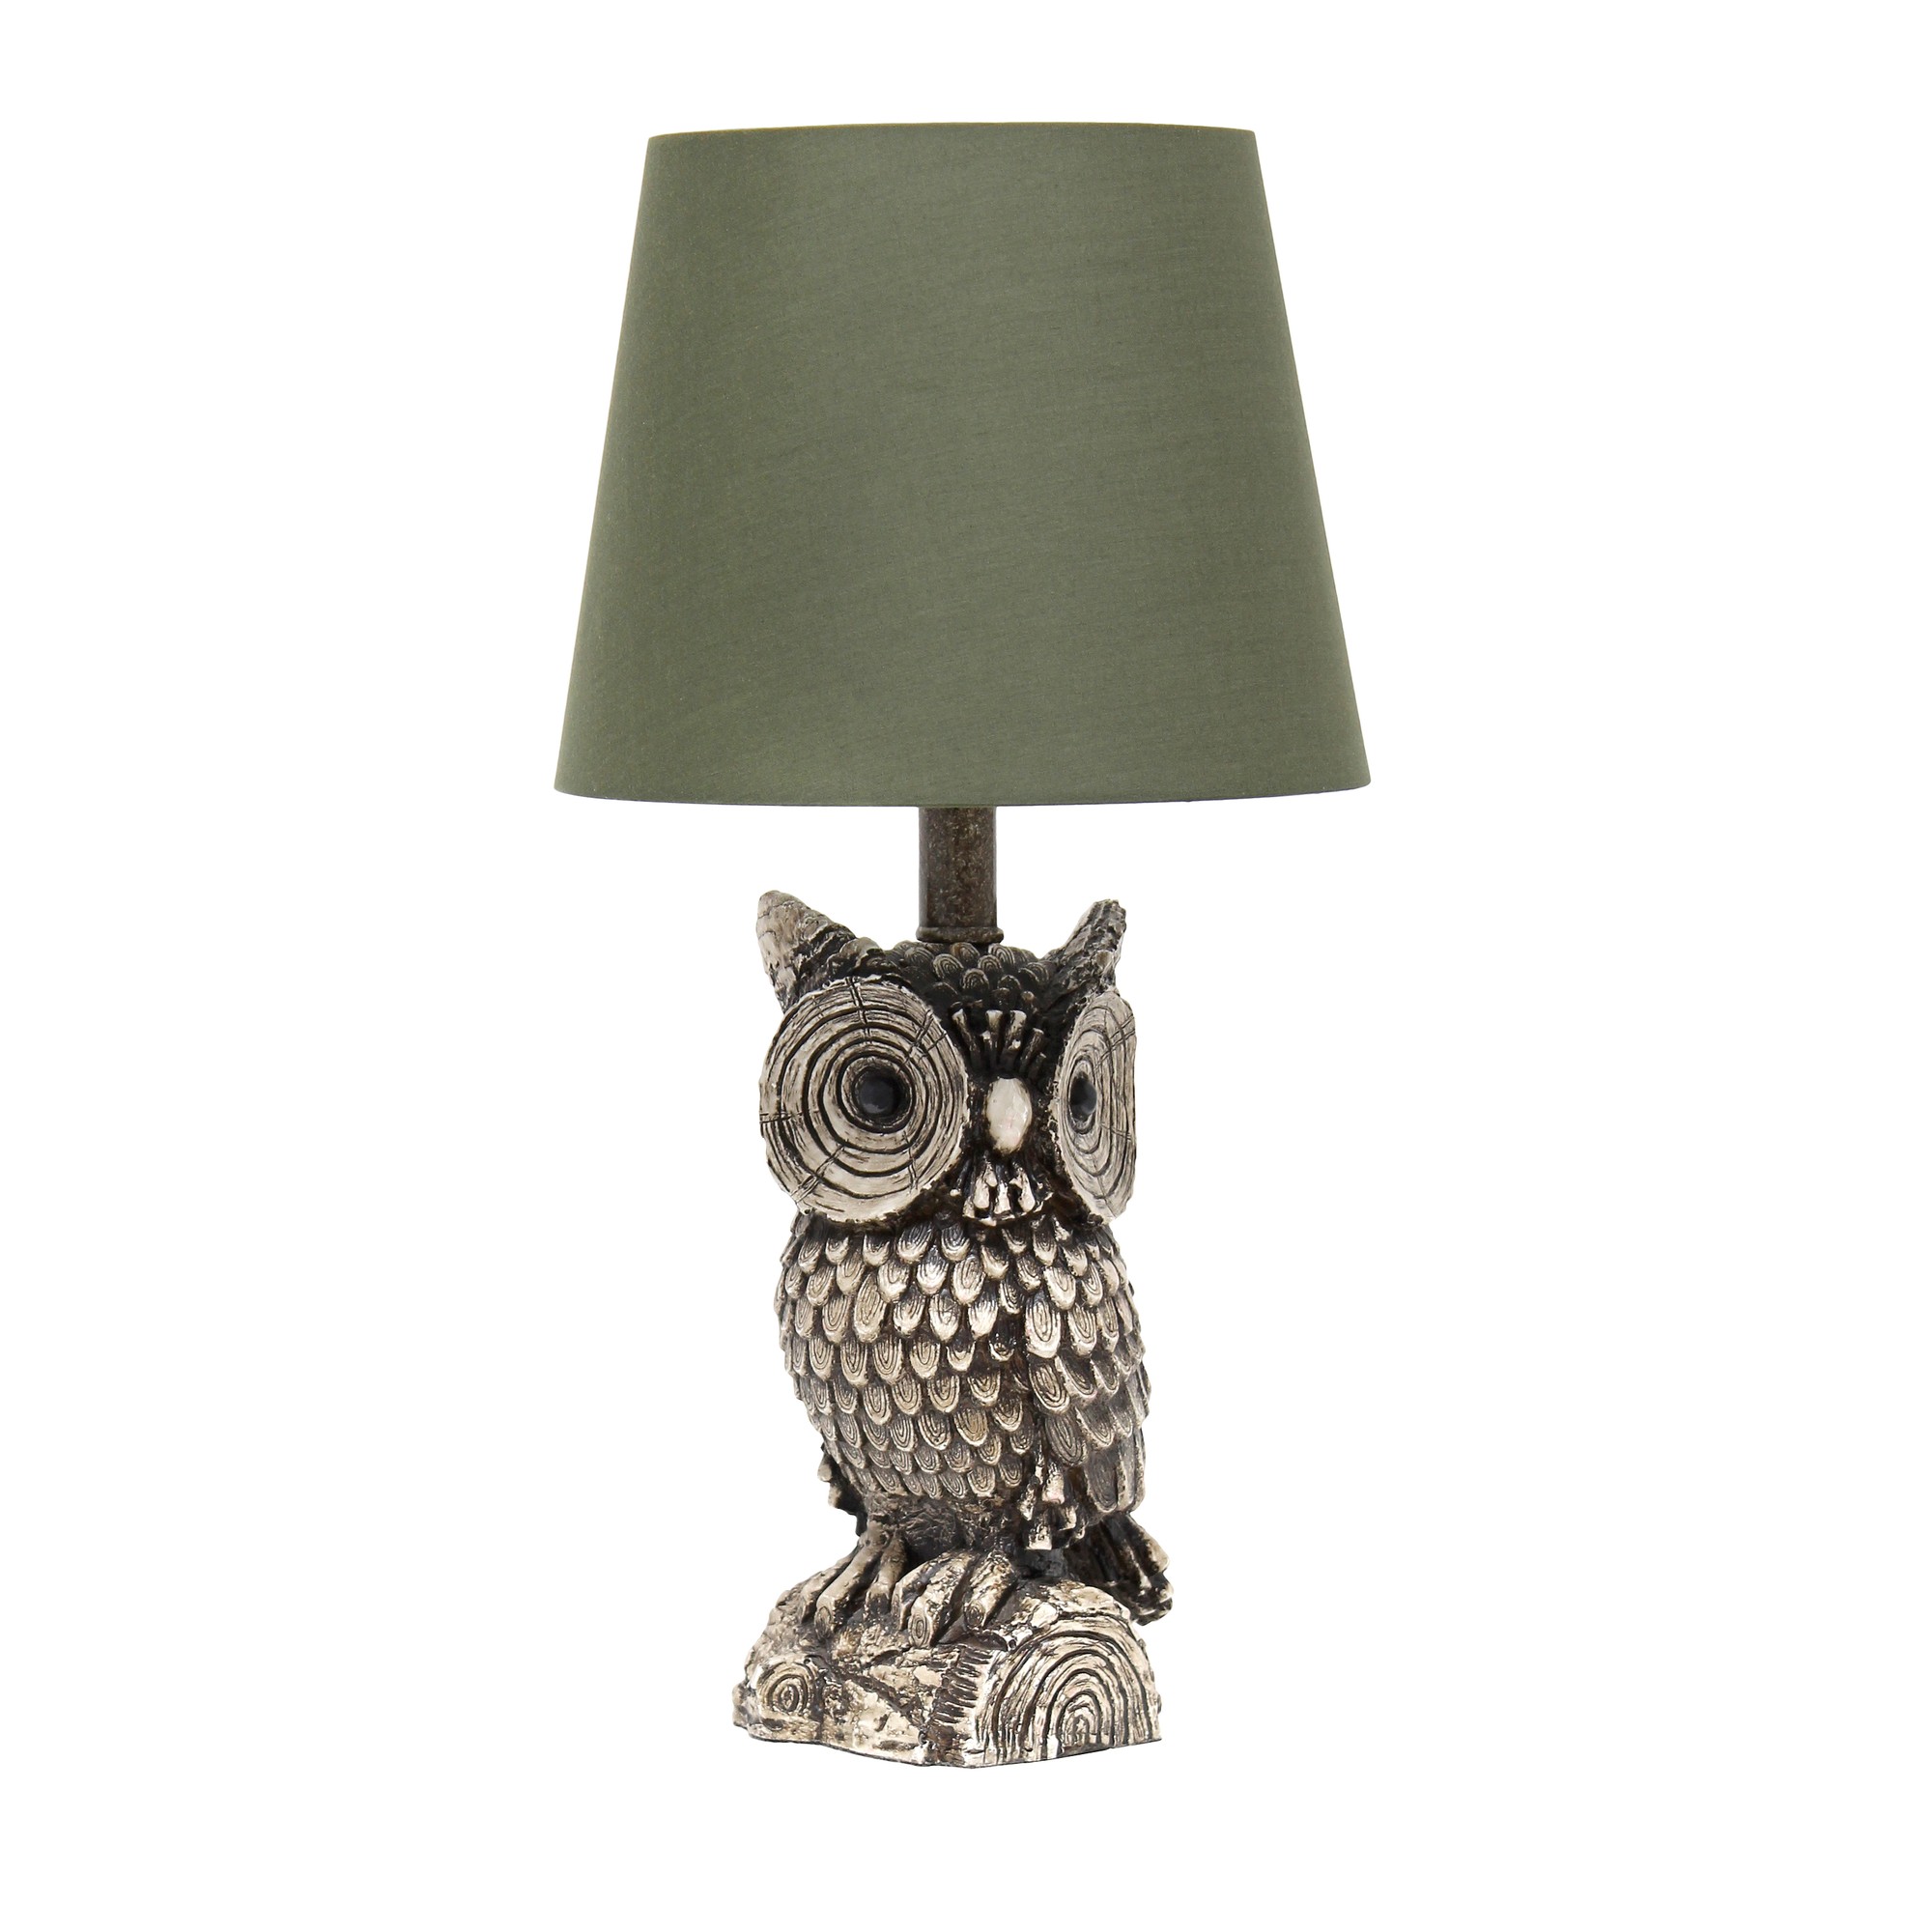 19.85" Brown and White Owl Table Lamp Green Shade